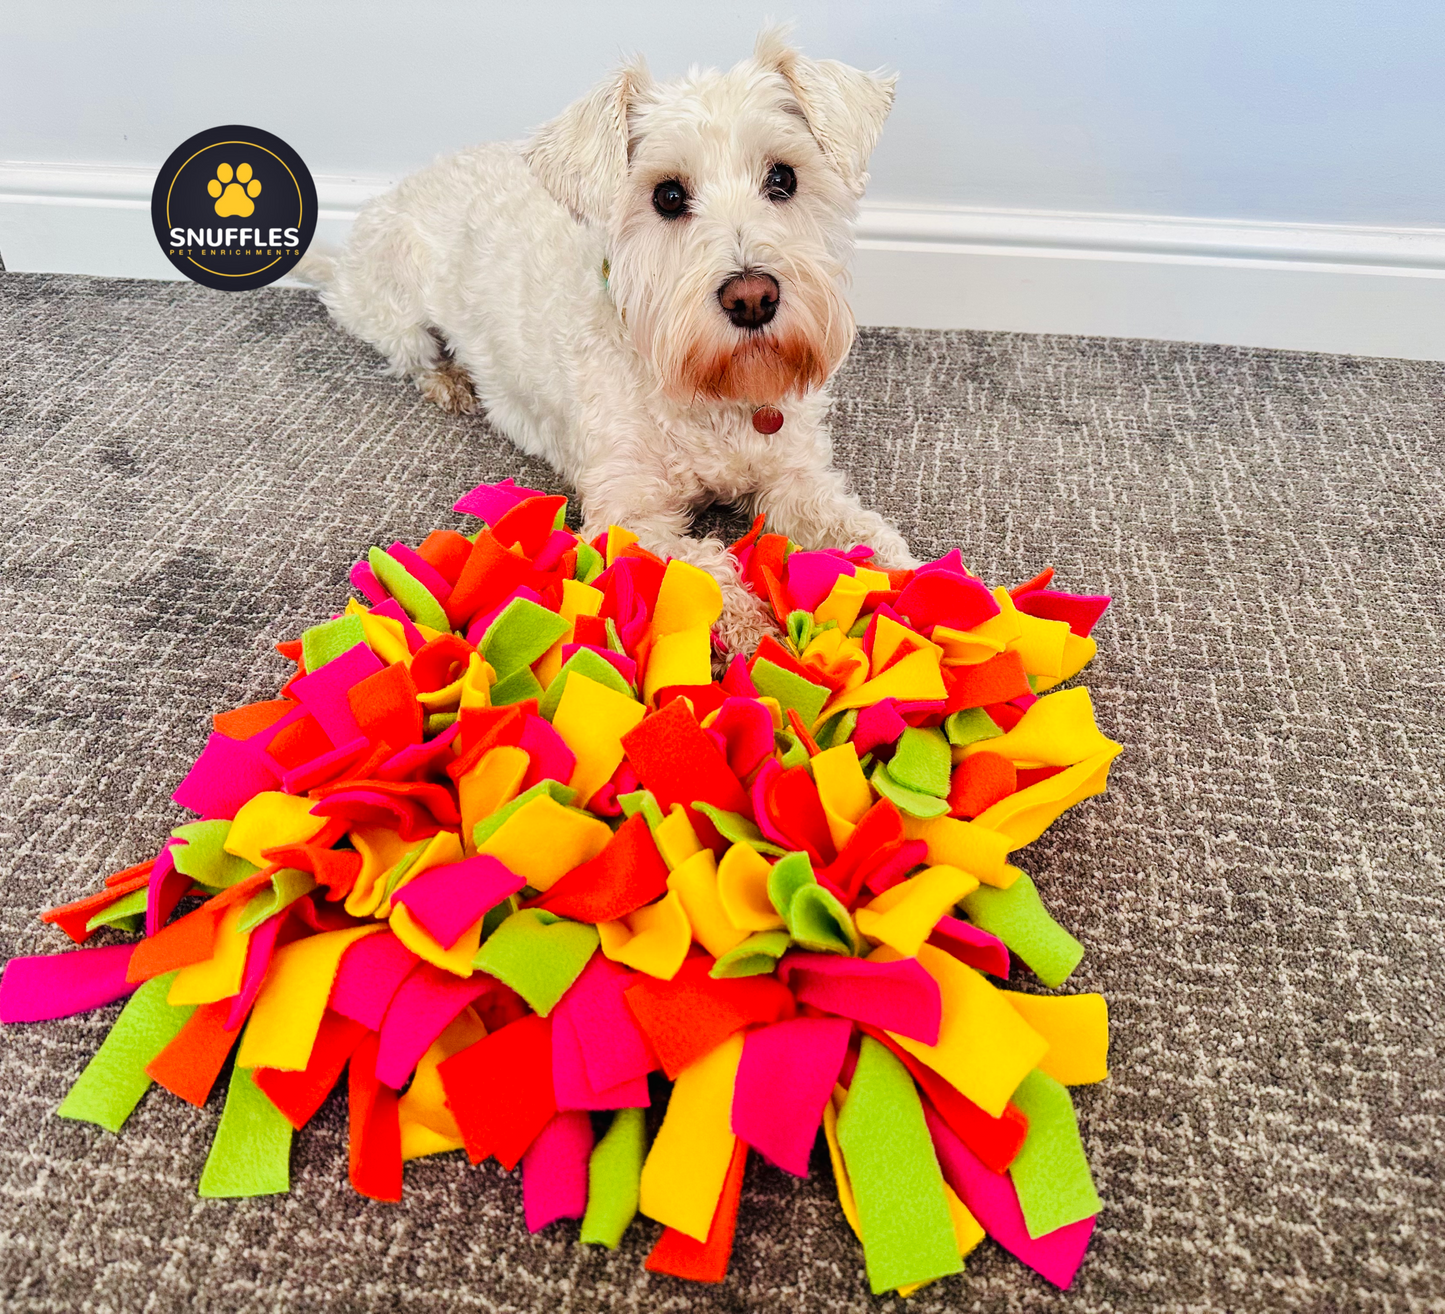 Medium Multicoloured Snuffle Mat For Dogs And Small Pets, 4 Colour Options Available